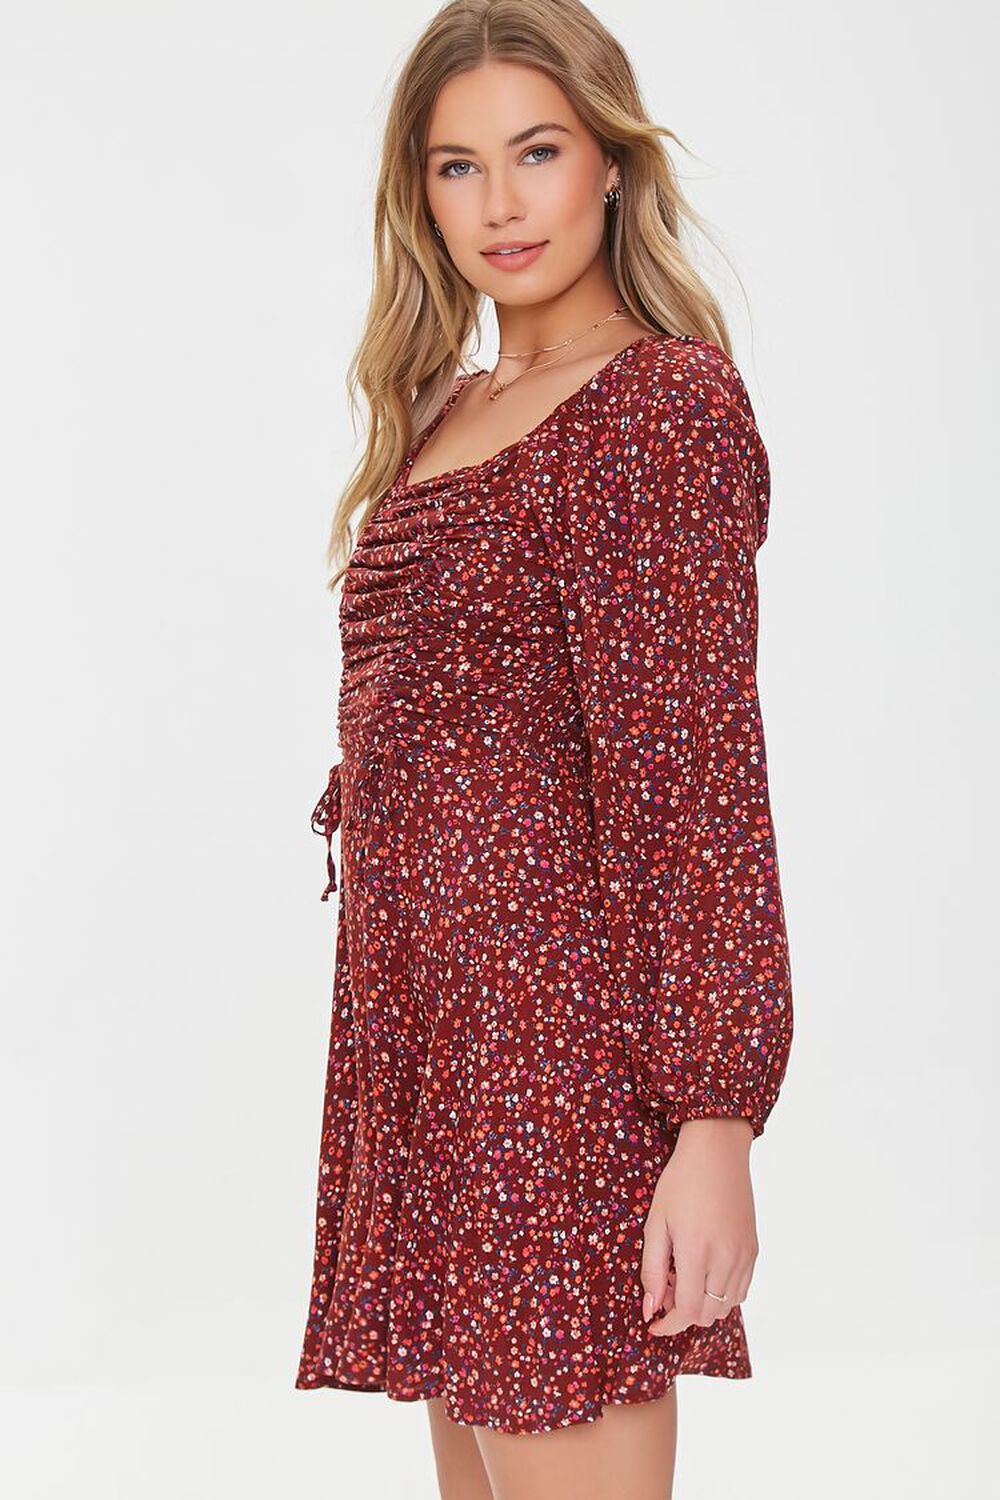 BURGUNDY/MULTI Ditsy Floral Ruched Mini Dress, image 2